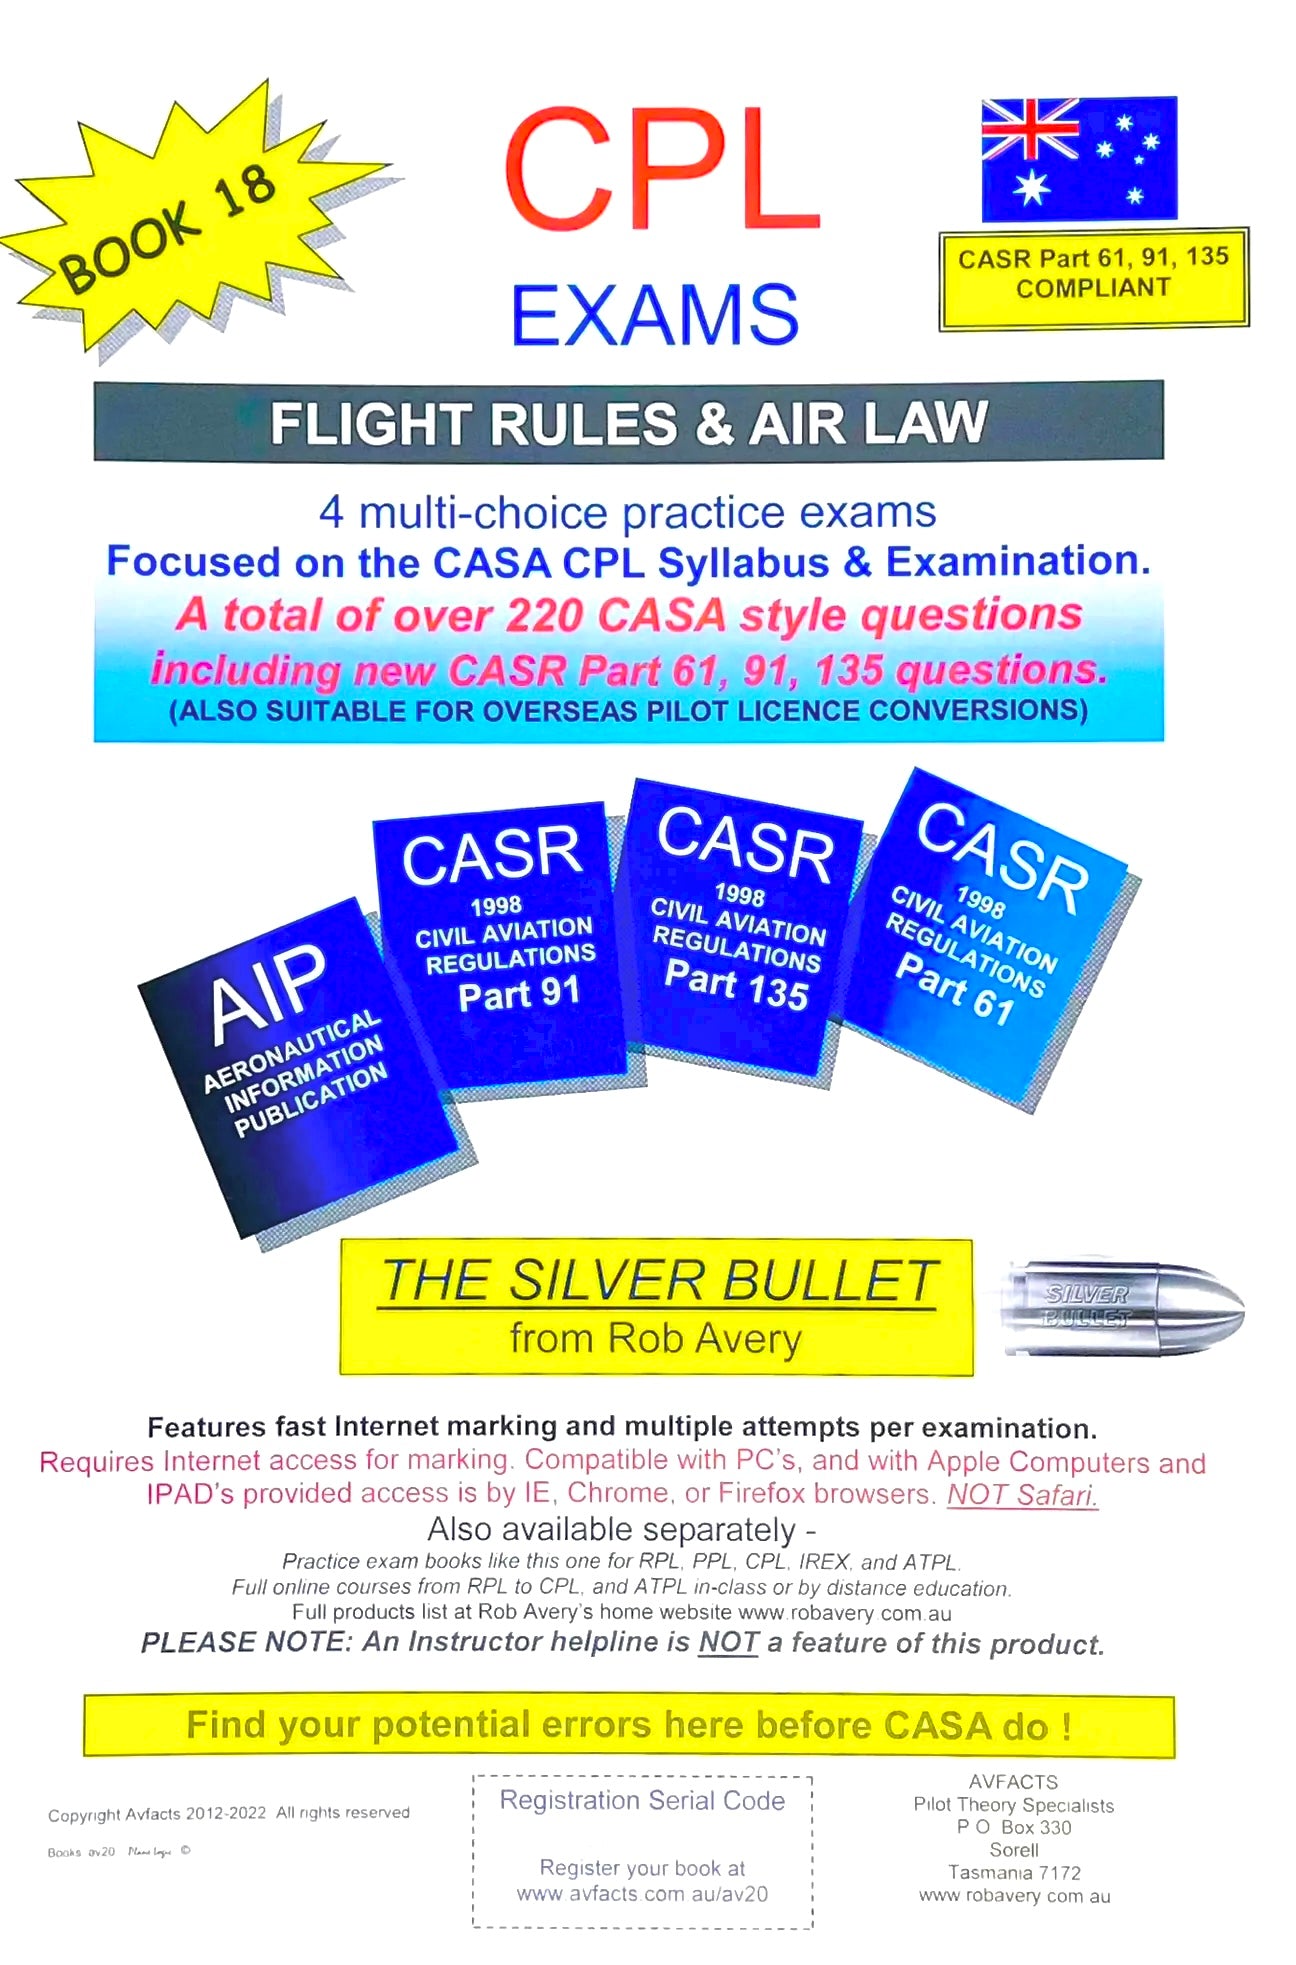 Avfacts by Rob Avery CPL Flight Rules & Air Law Practice Exams - AV20